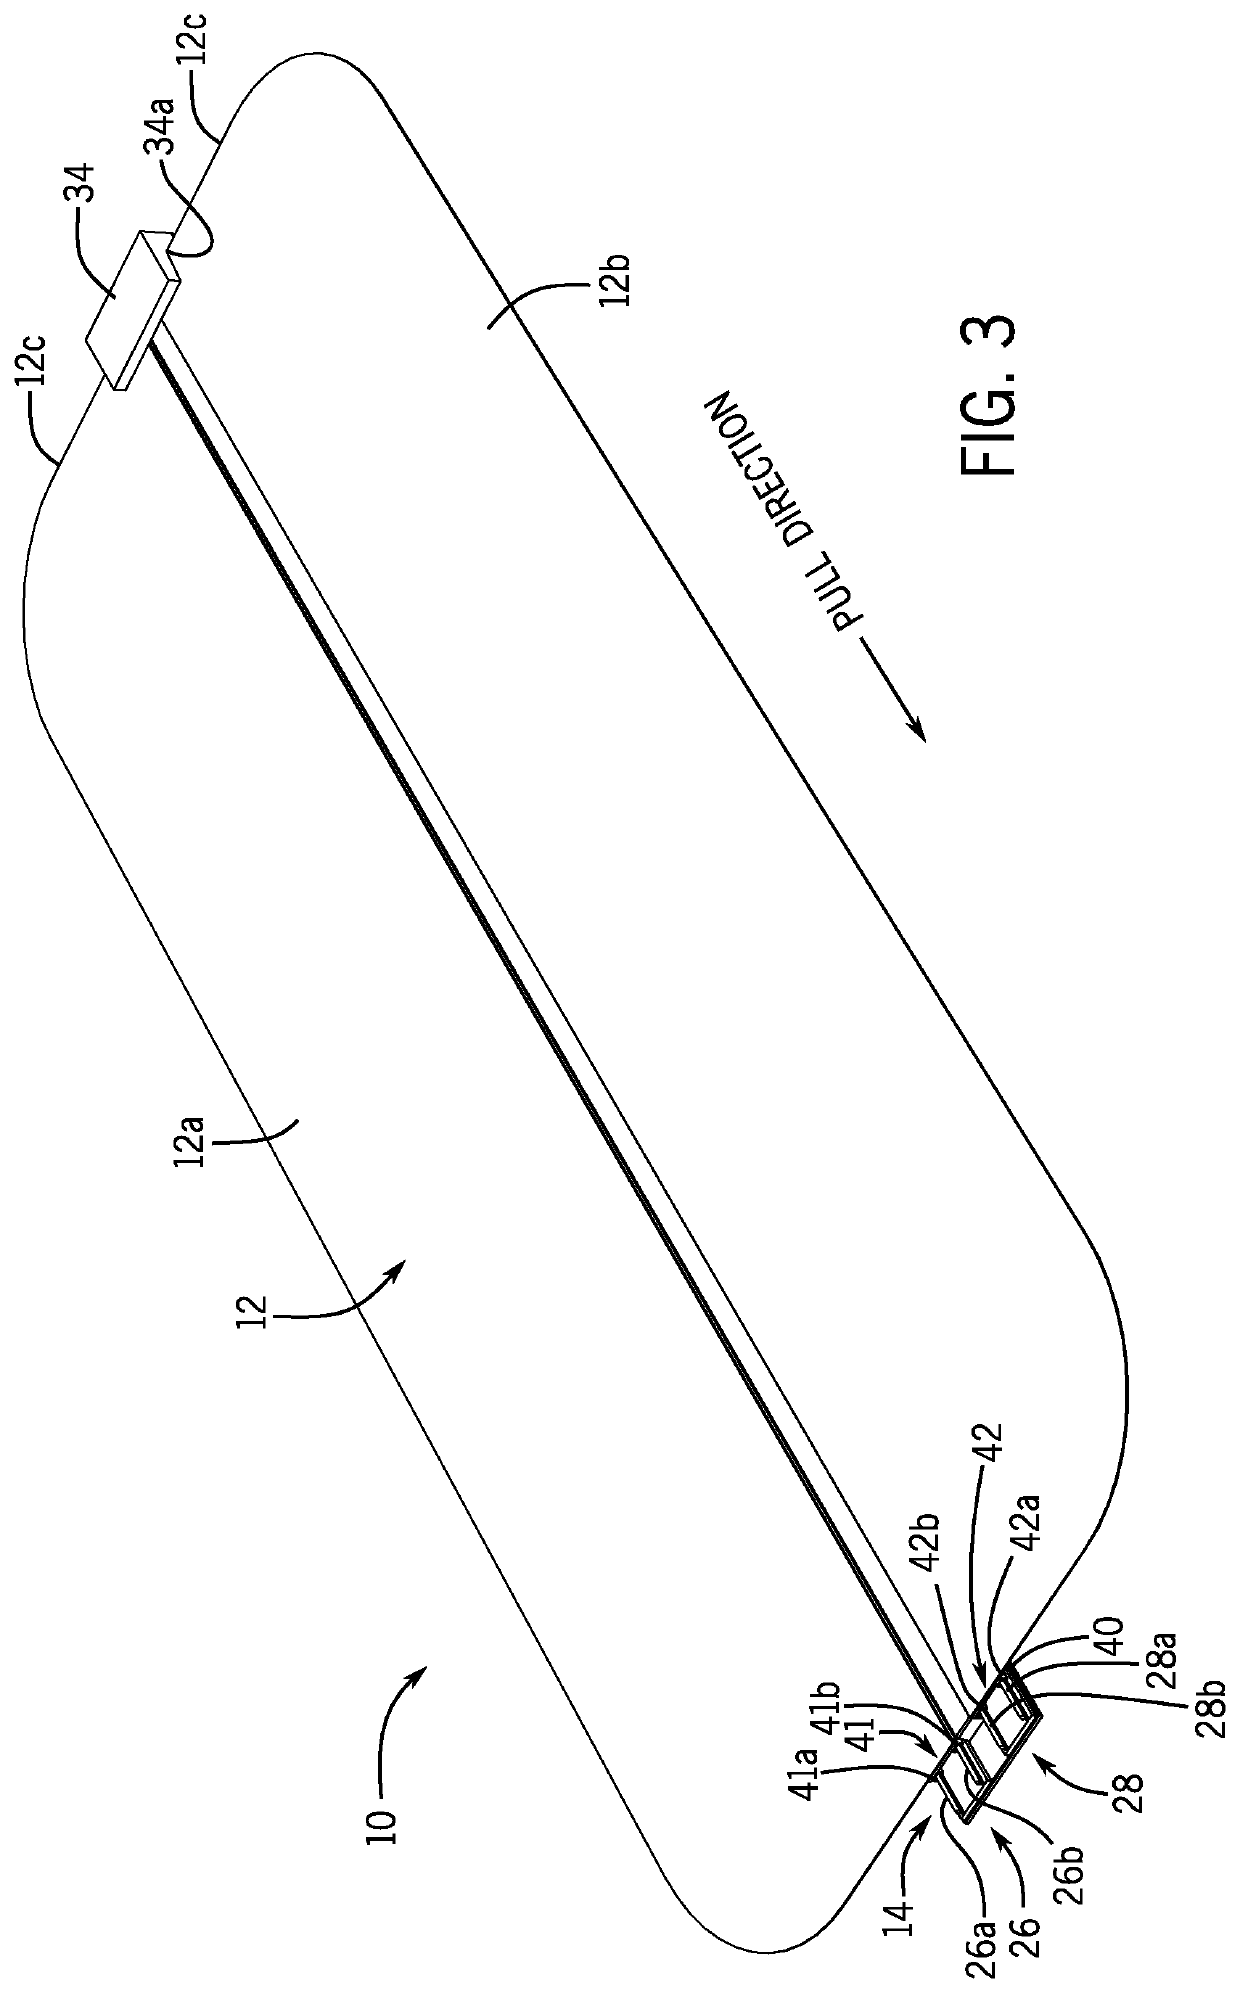 Tissue harvesting devices and methods